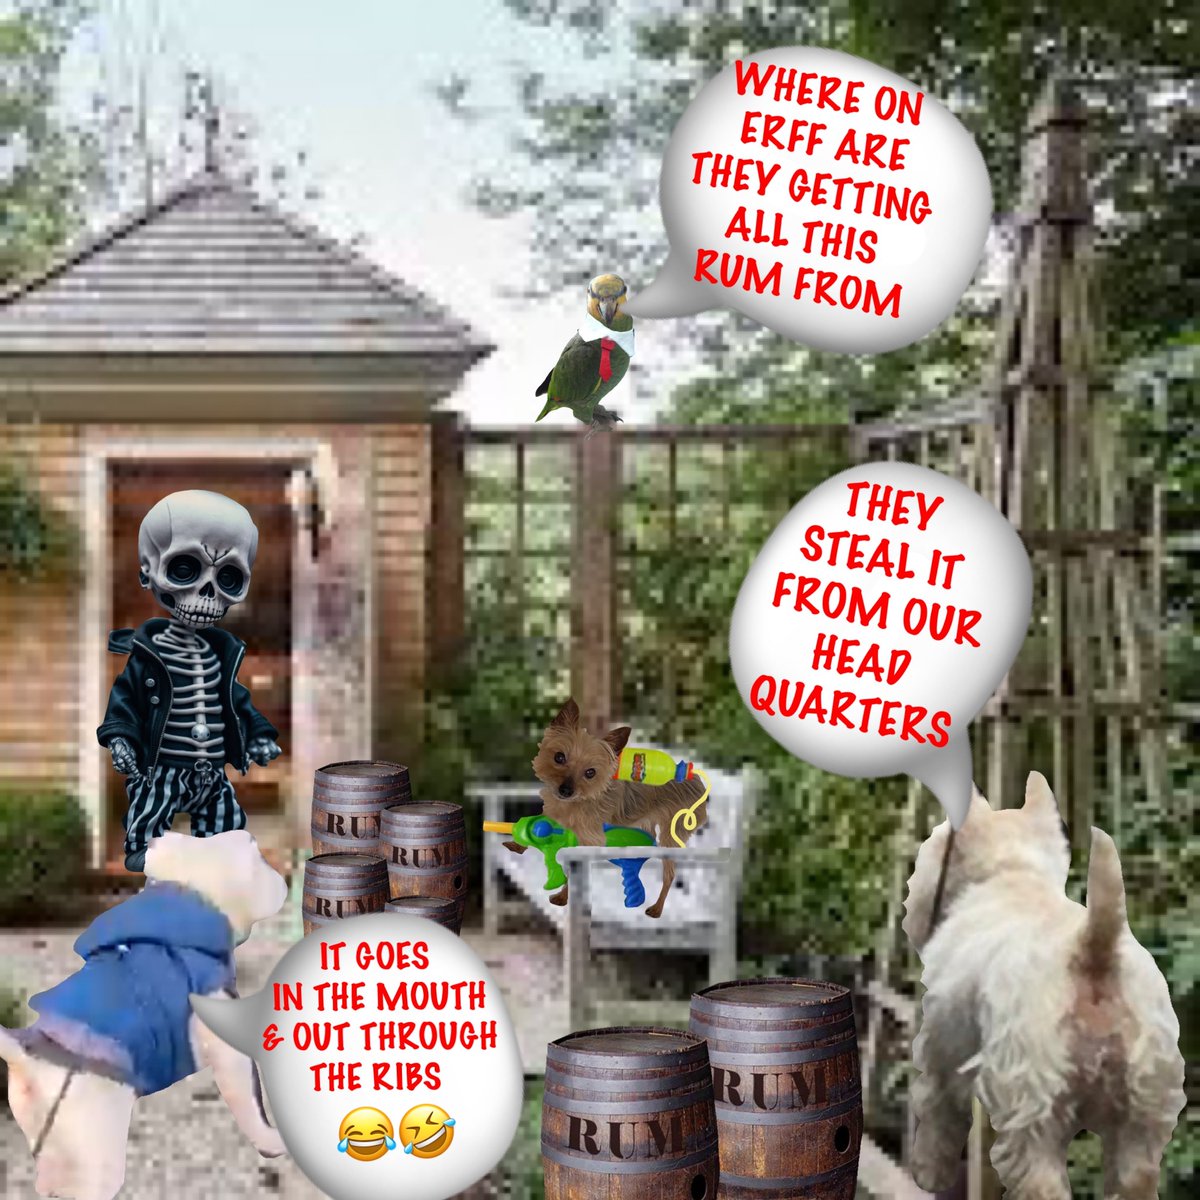 18 #zzst 🪷💐😅🪻🌻🌷😂🌸🤣🌹🌺🌼🪷🌻🌼
THE ZOMS THINK RUM  MAKES THEM MERRY..... BUT THEY ARE ZOMBIES THERE NOT MEANT TO BE MERRY🤨😠🤭